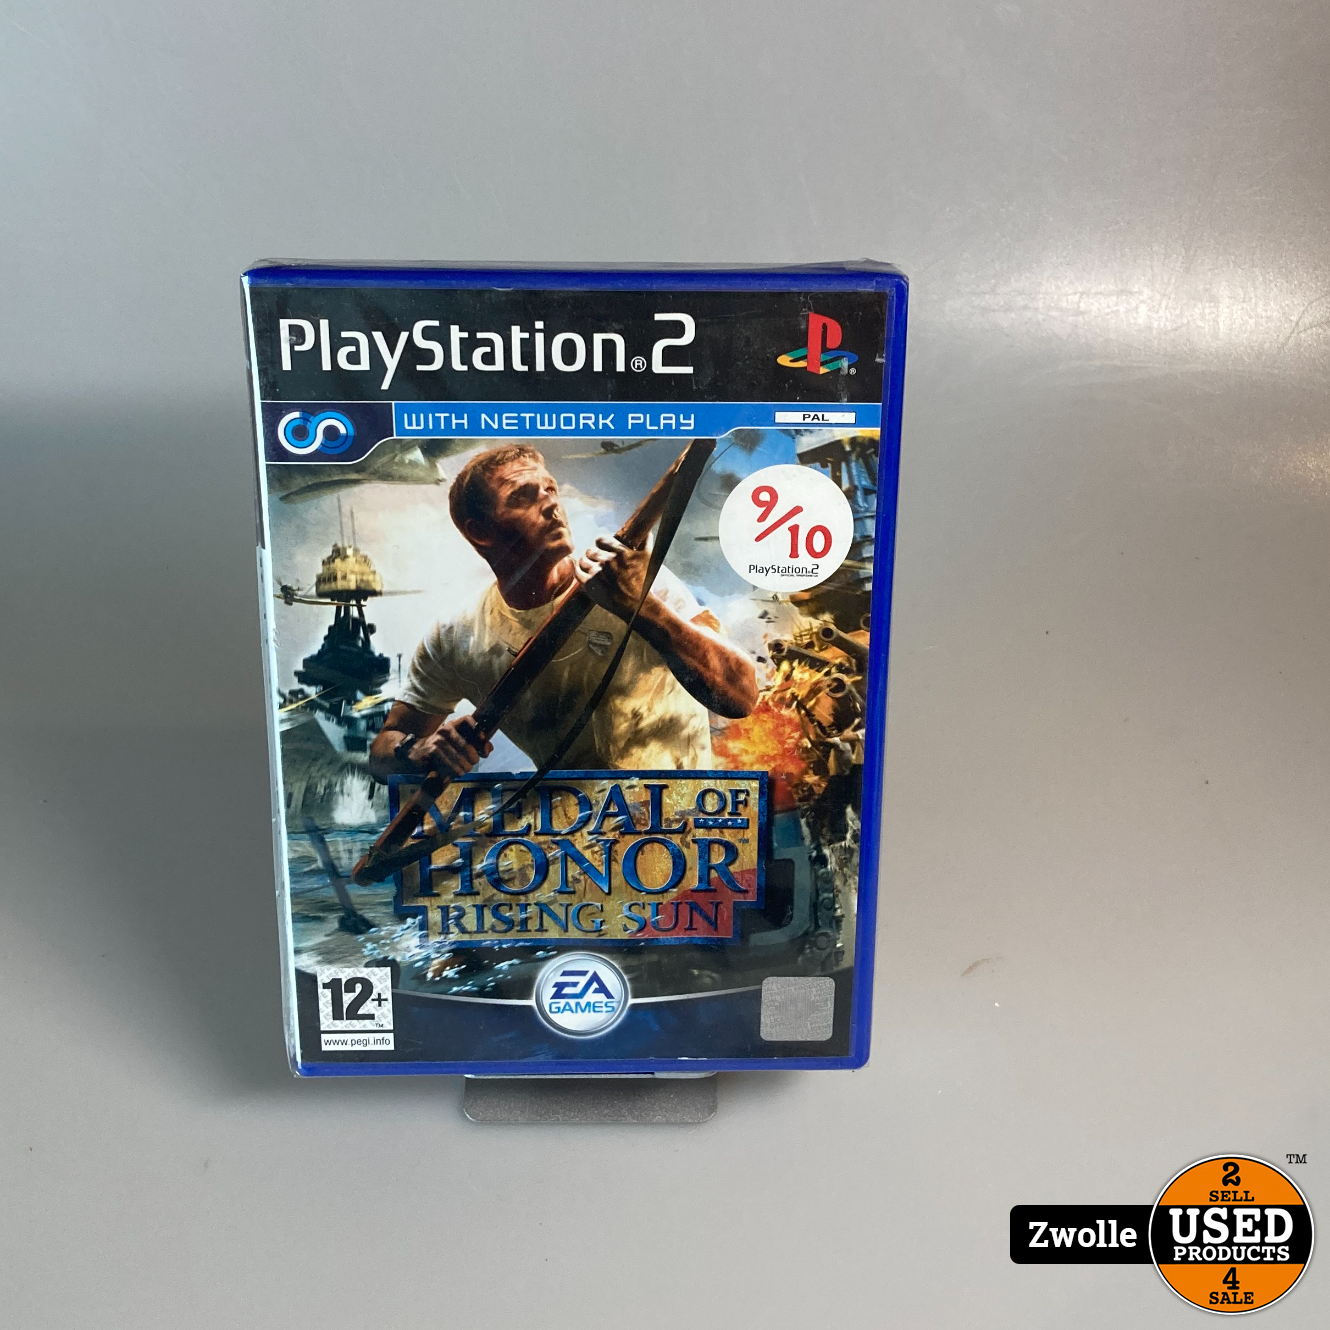 tsunami antenne vasthoudend playstation ps2 game medal of honor : rising sun - Used Products Zwolle